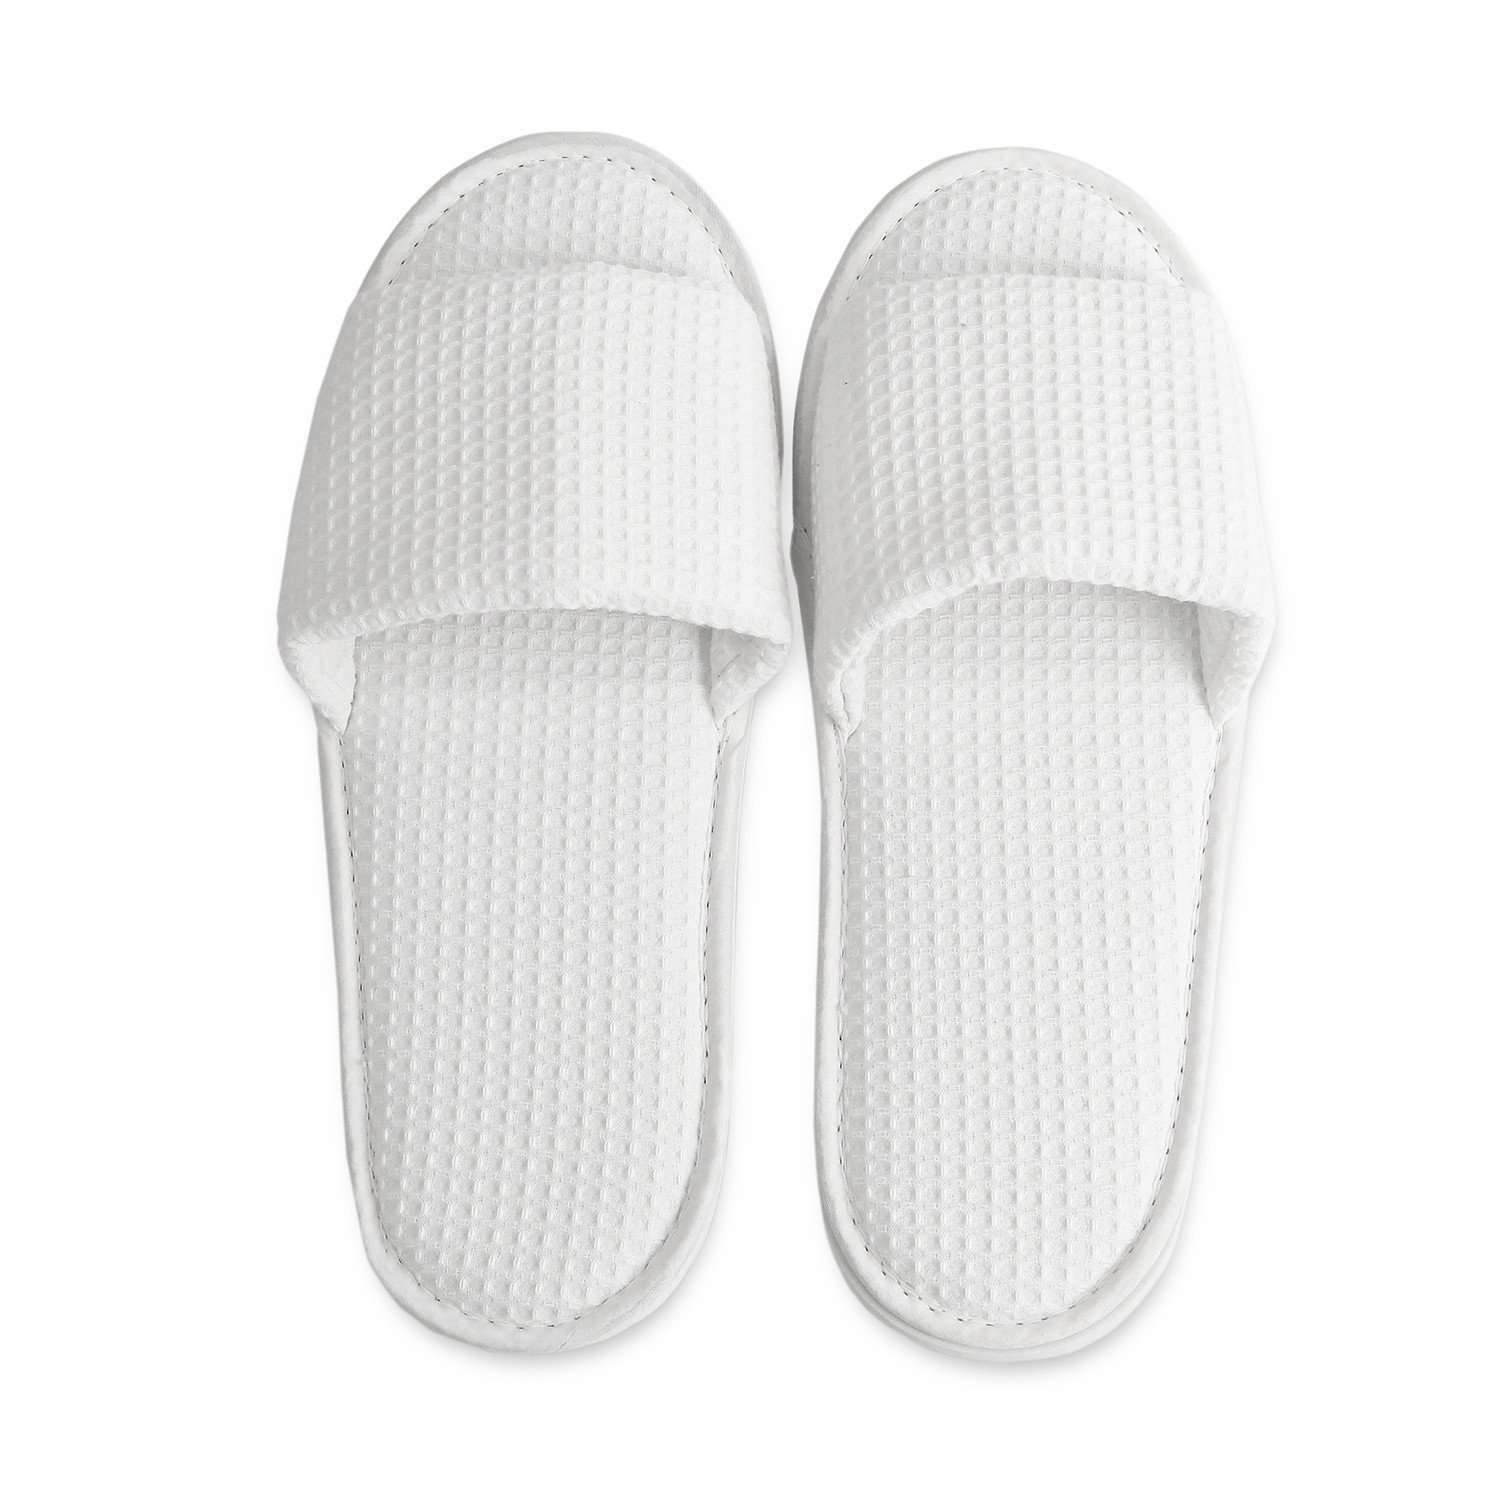 Lakeview Waffle Spa Slippers | Shop Luxury Bedding and Bath at Luxor Linens